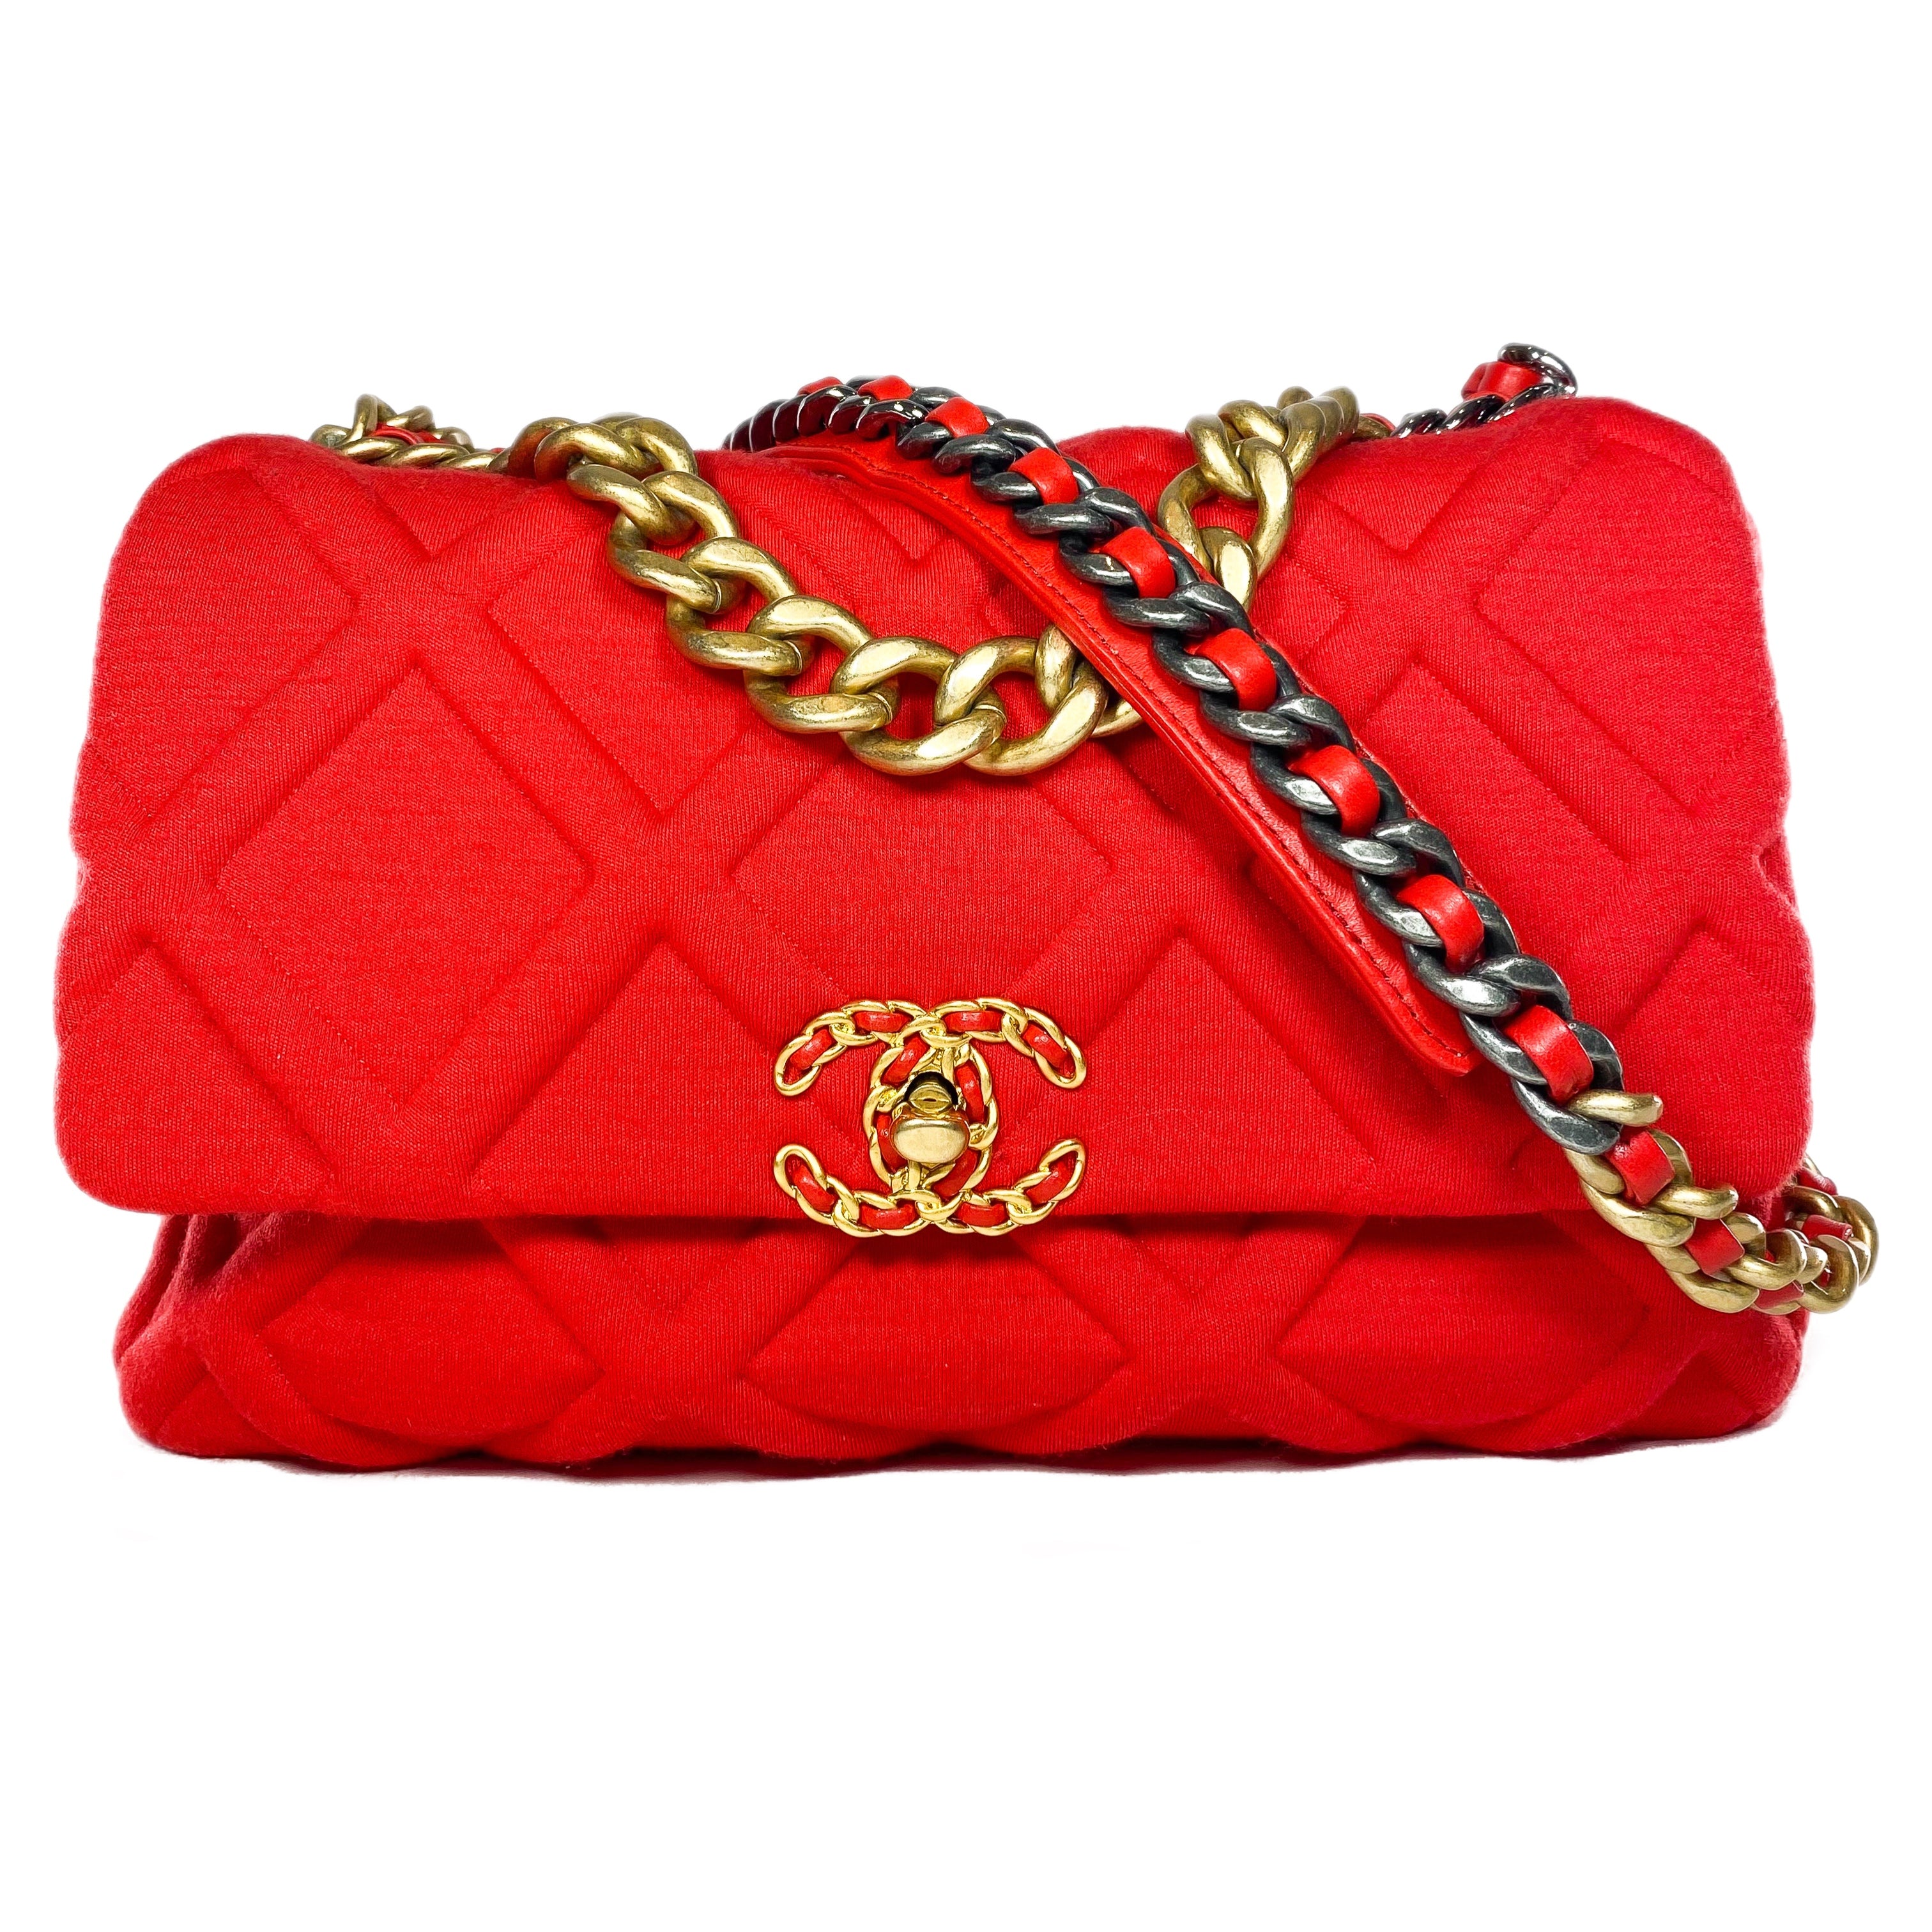 Chanel 19 Large Rouge Jersey Flap Bag